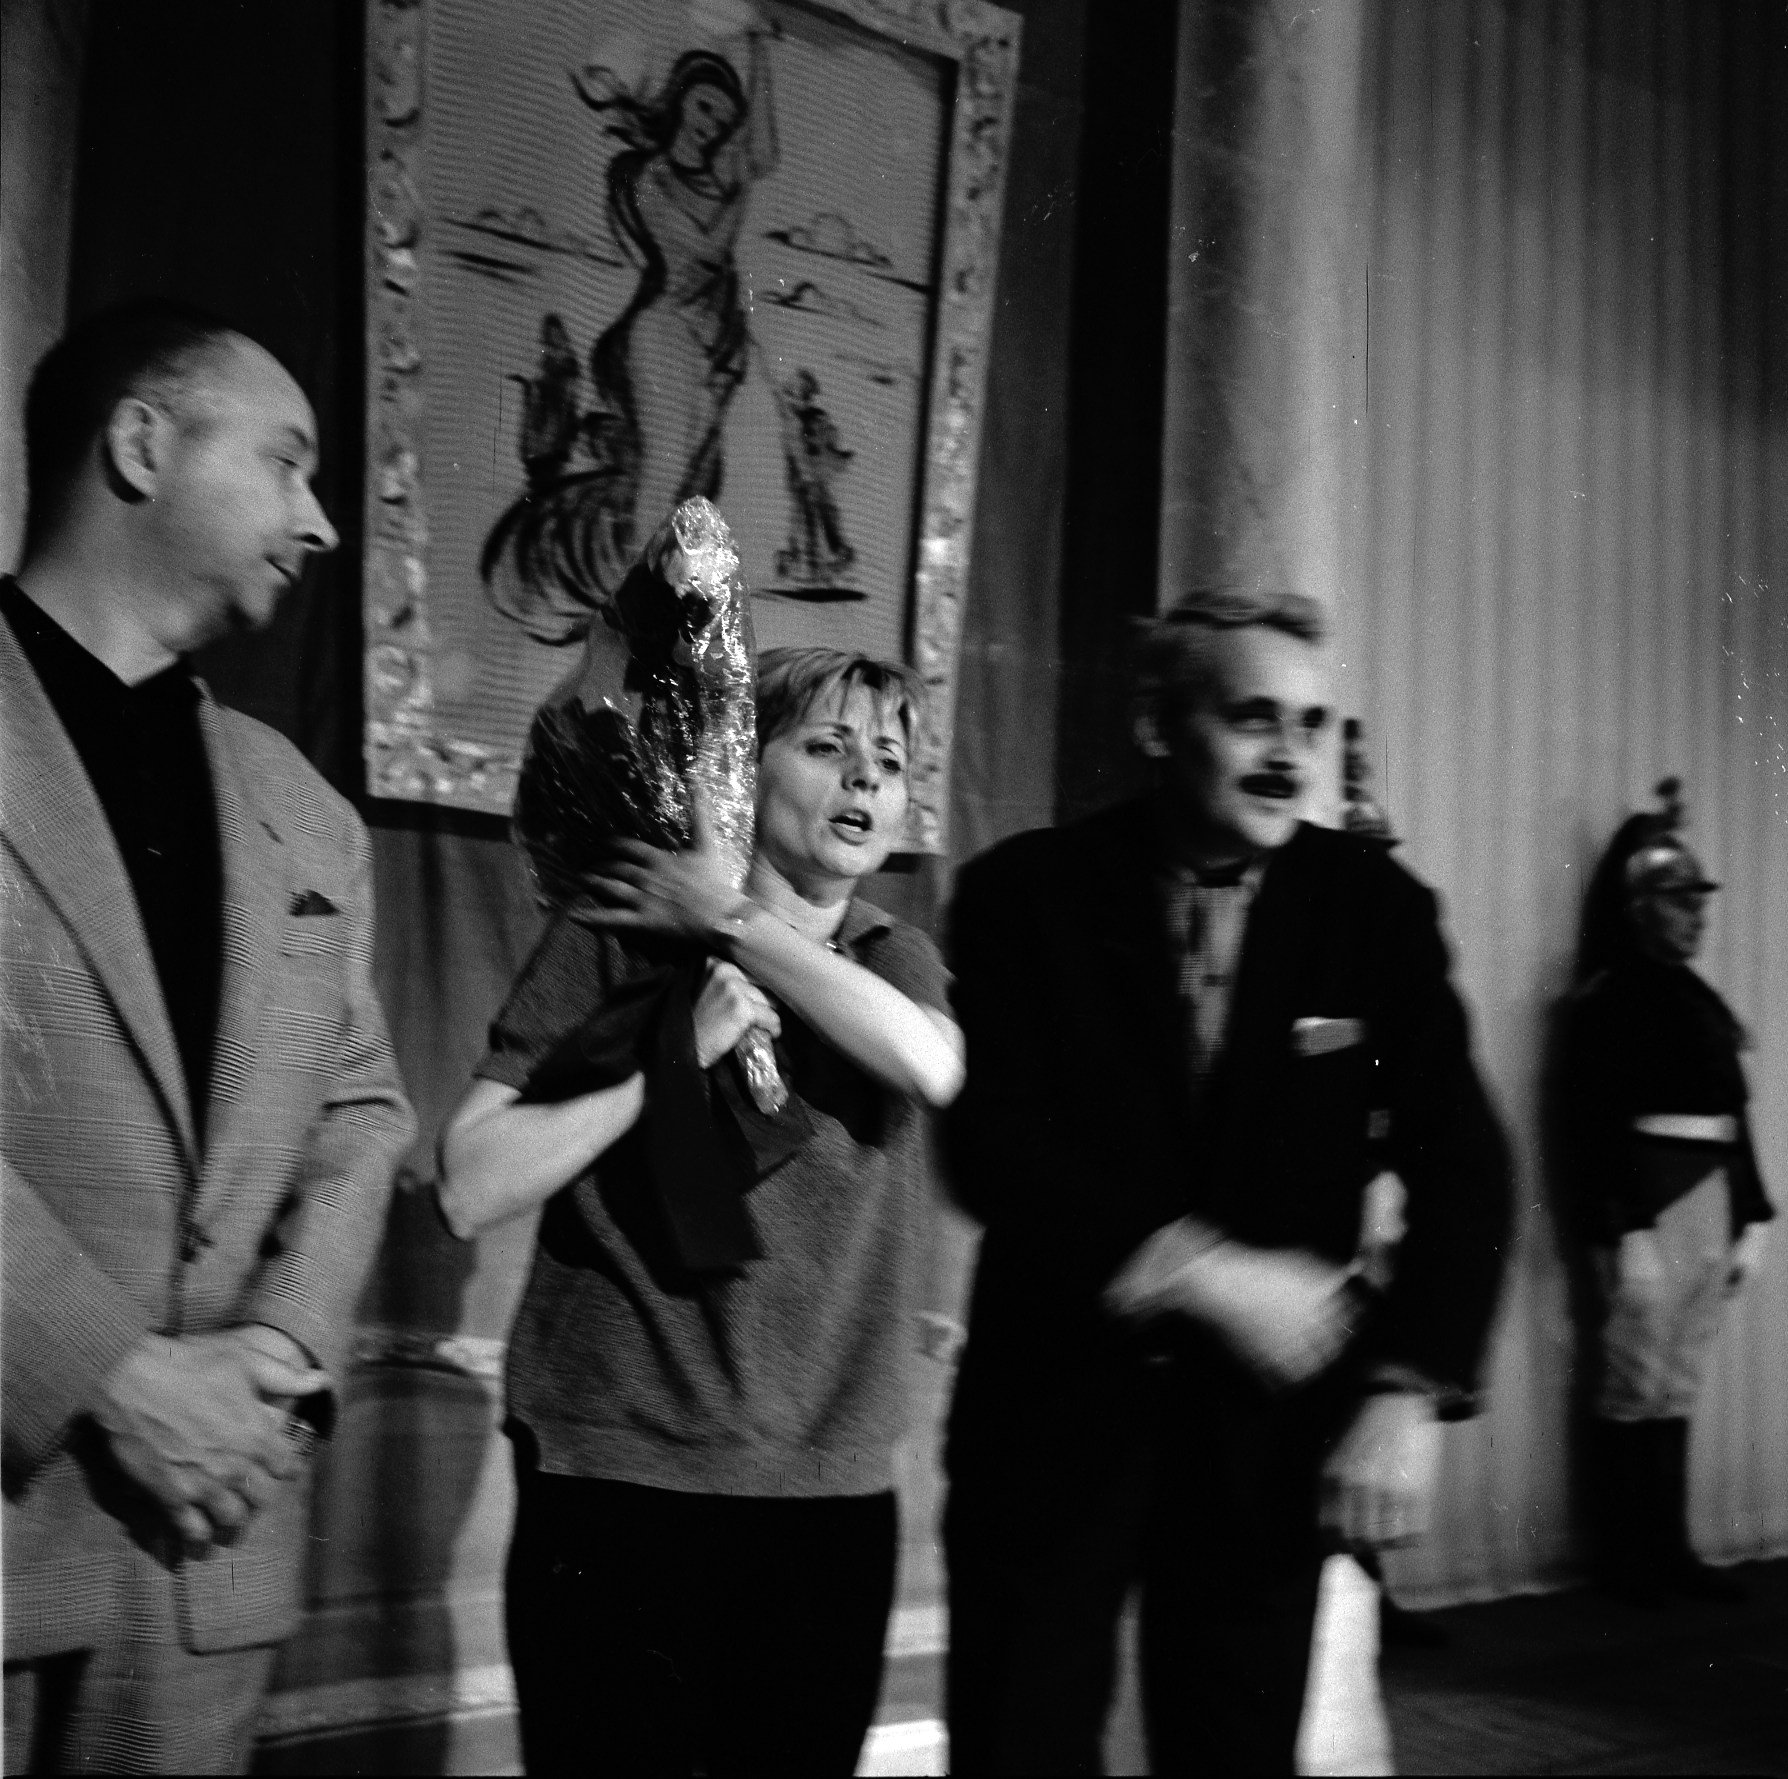 Jacques Mareuil, Anny Cordy, Roger Bontemps, 1964 | Source: Wikimedia commons By André Cros, CC BY-SA 4.0